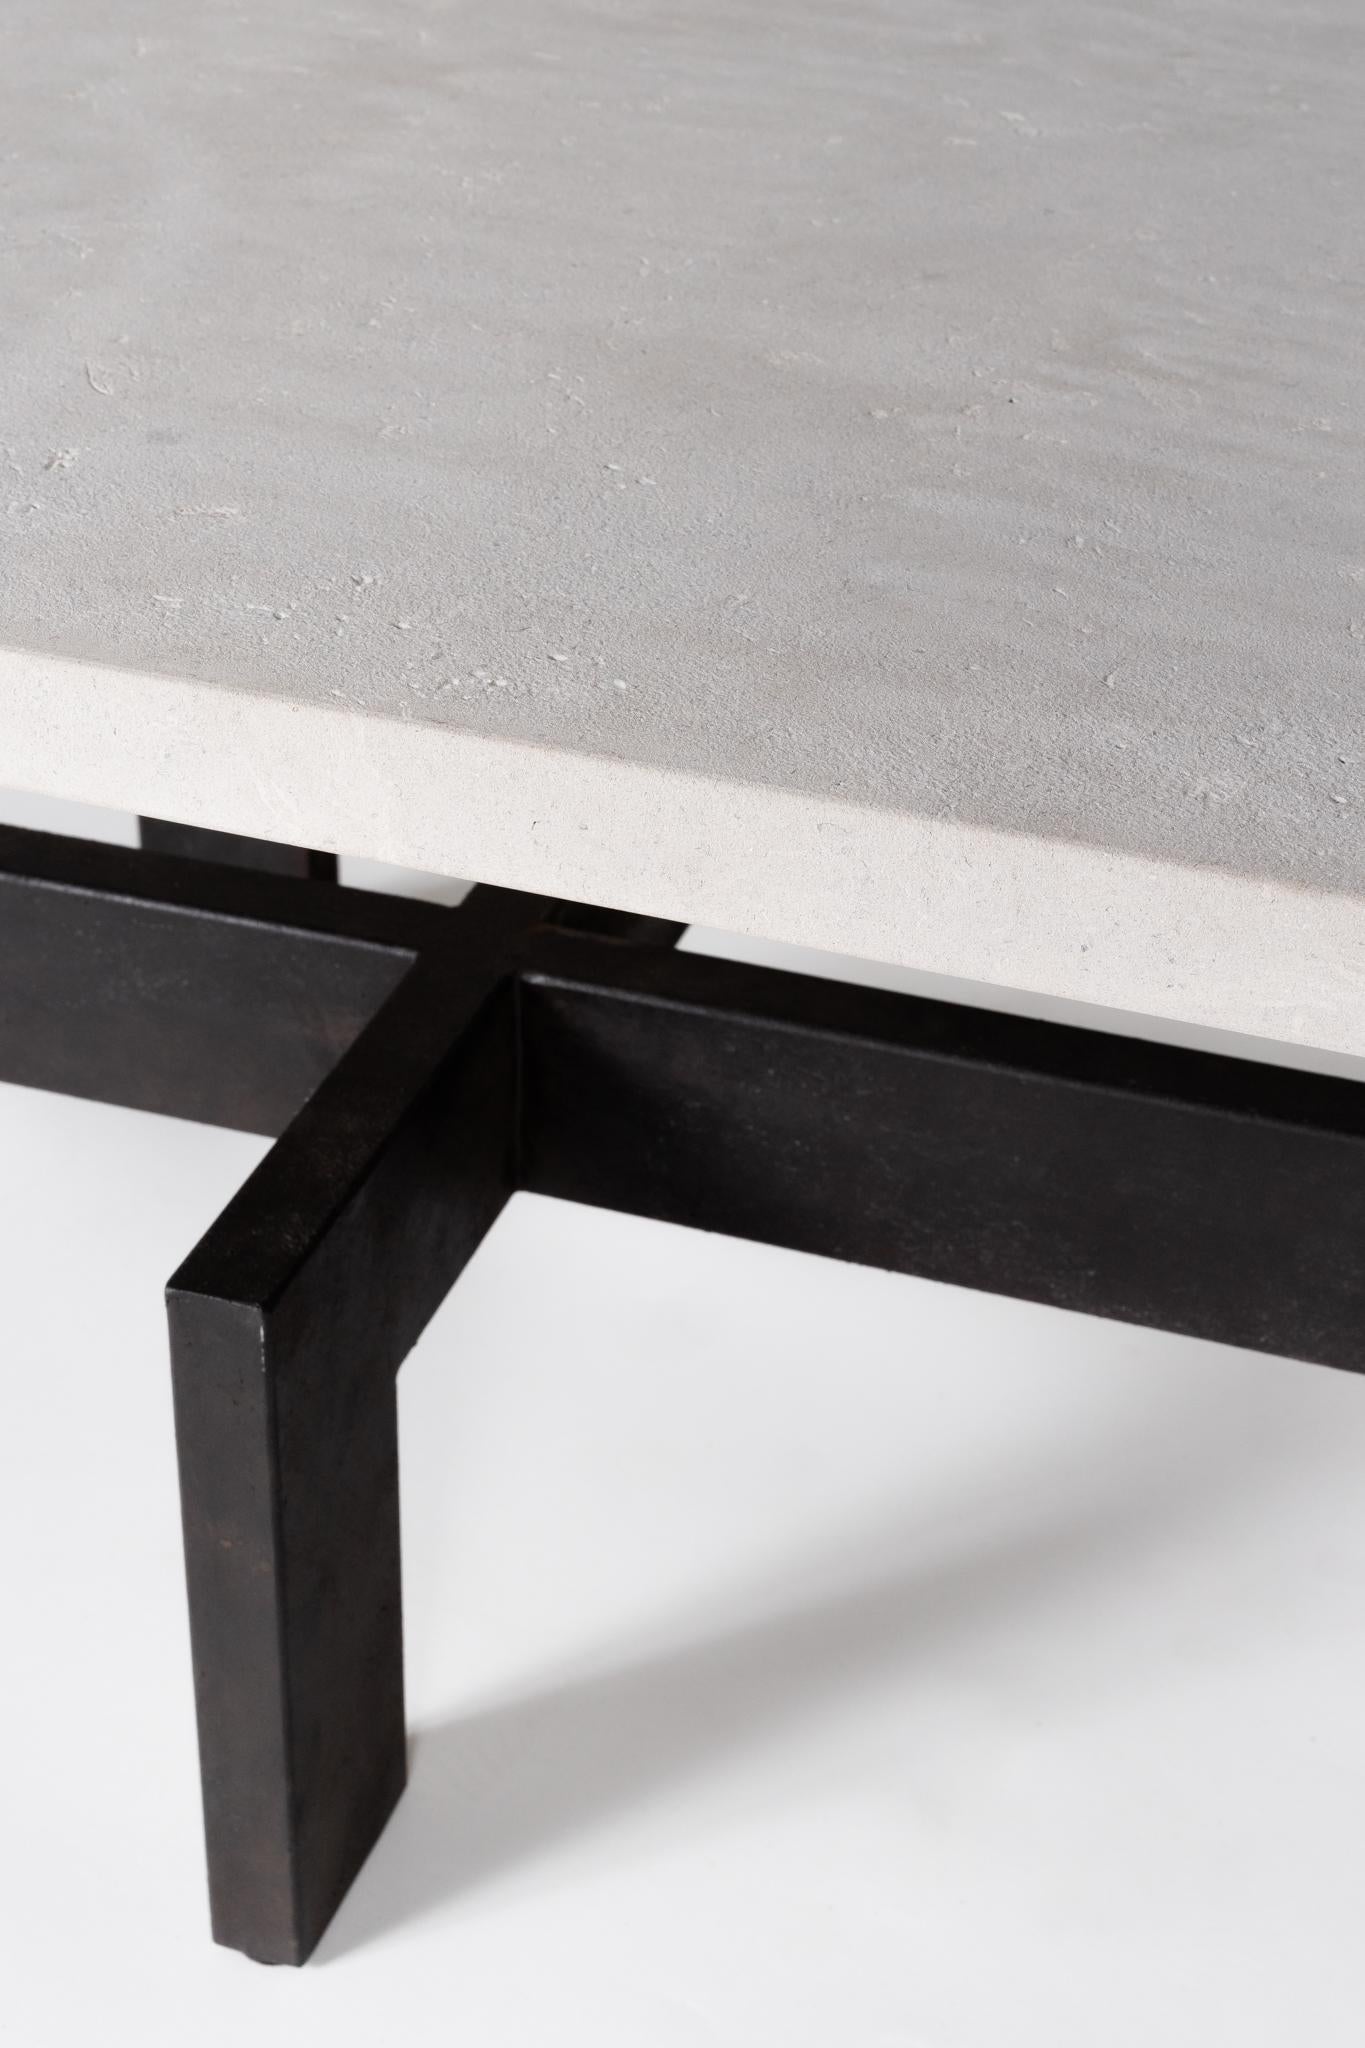 Modernist Patinaed Steel Coffee Table with Limestone Top In Good Condition For Sale In Dallas, TX